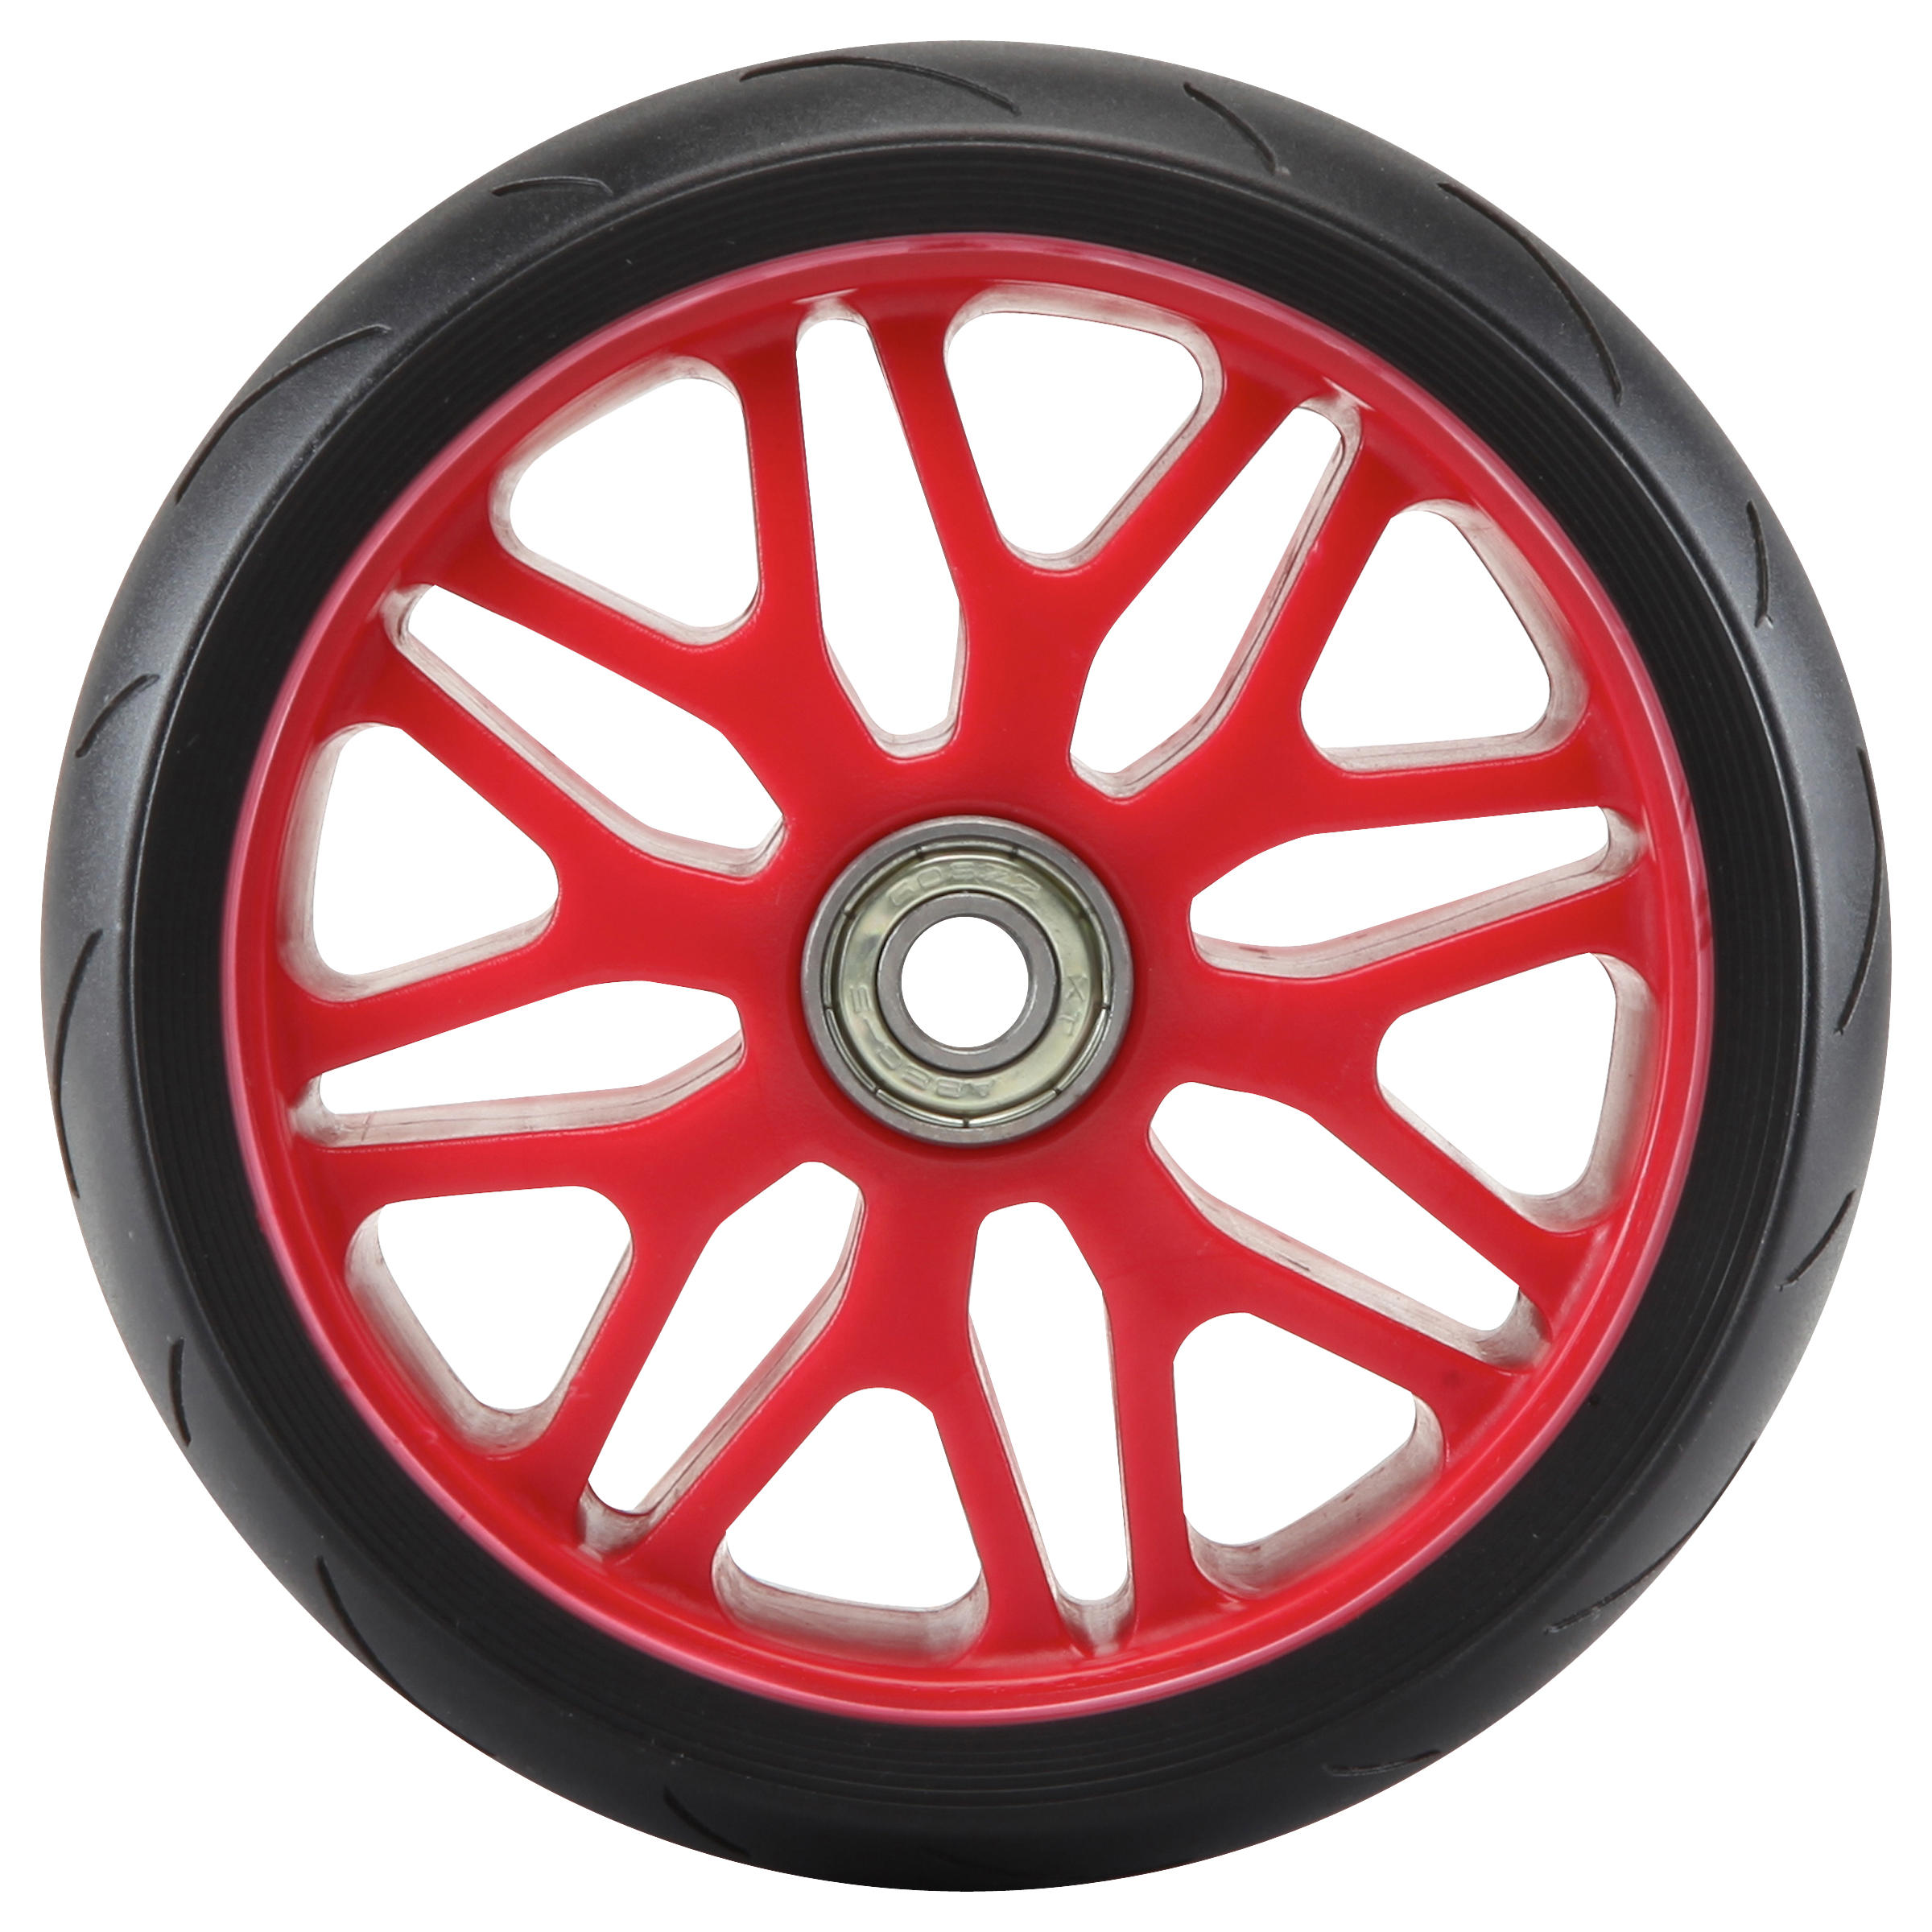 

Scooter Wheels with Bearing Dtx Front -  By OXELO | Decathlon